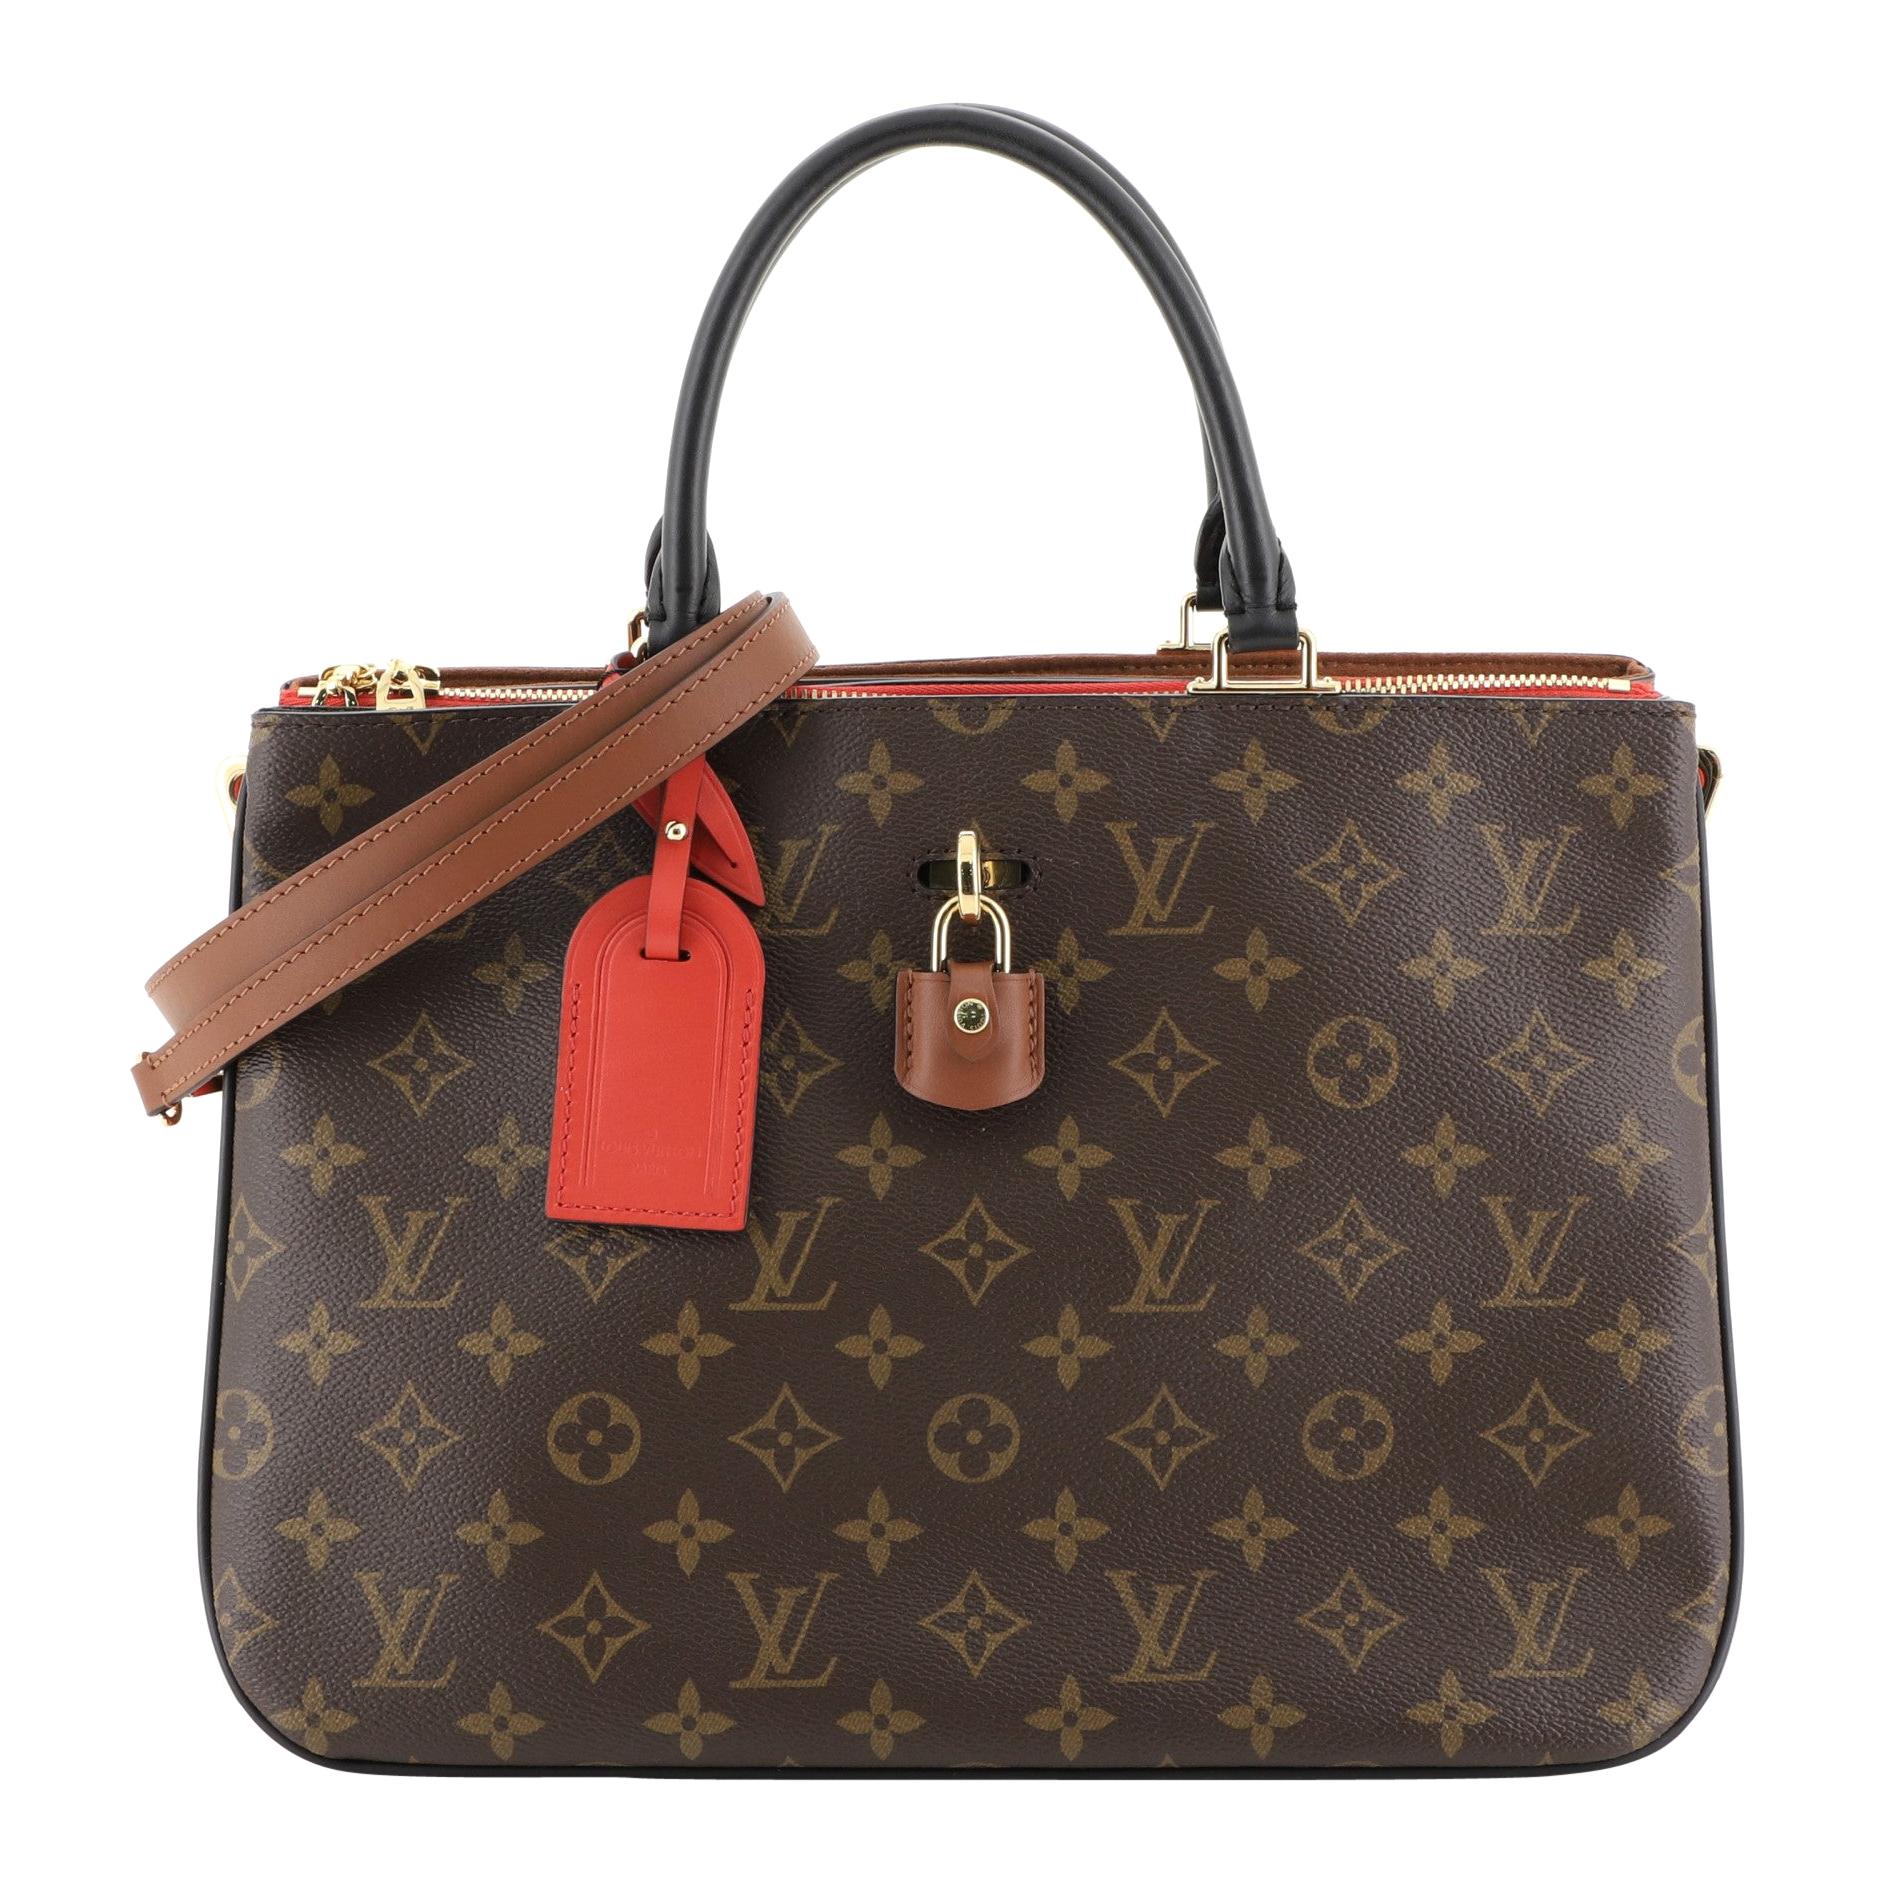 Louis Vuitton Millefeuille Handbag Monogram Canvas and Leather at